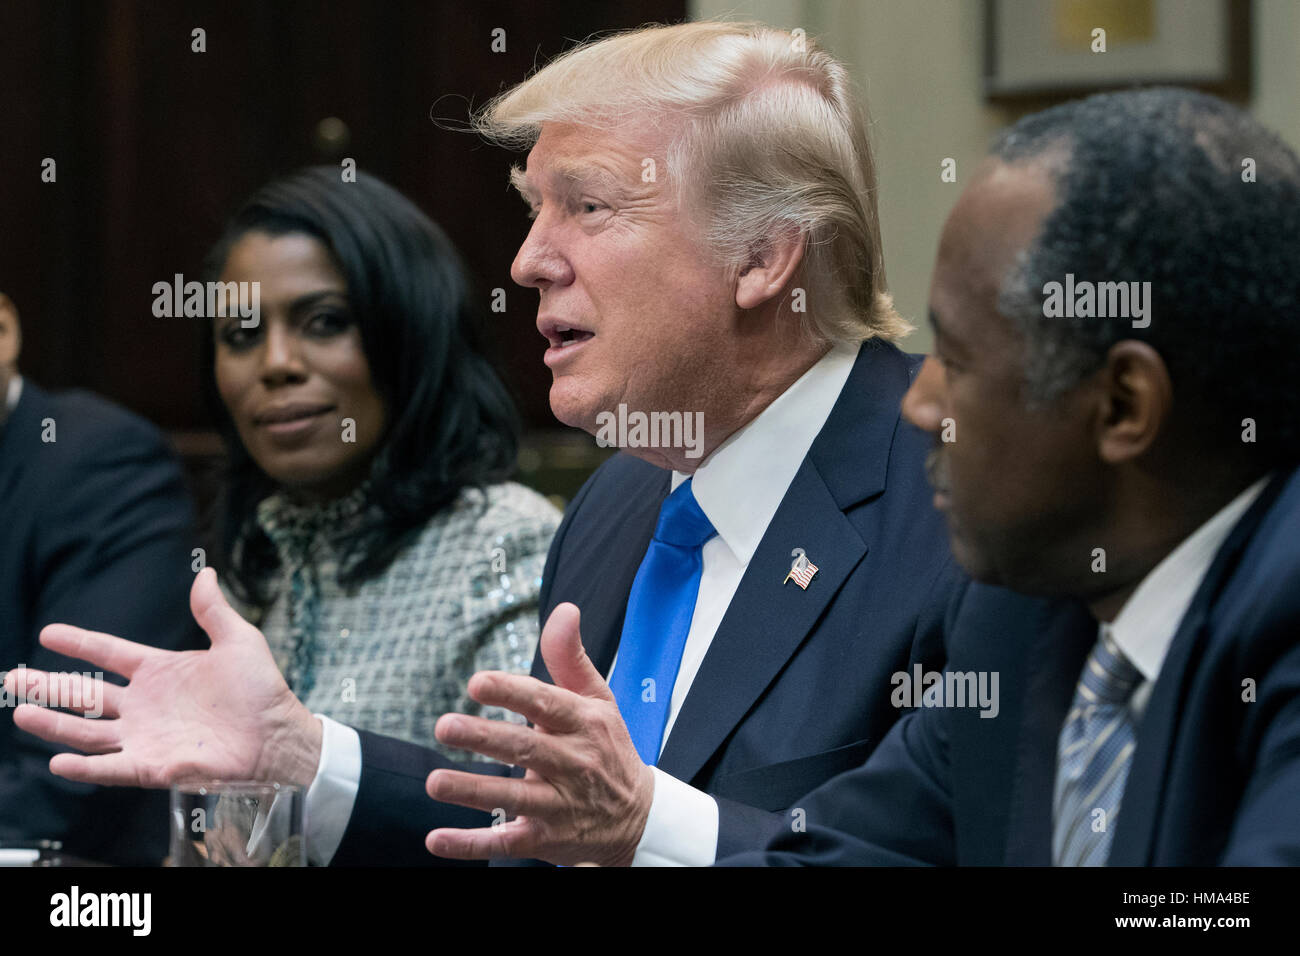 Washington, USA. 1st Feb, 2017. United States President Donald J. Trump (C) speaks between Director of Communications for the Office of Public Liaison Omarosa Manigault (L) and nominee to lead the Department of Housing and Urban Development (HUD) Ben Carson (R), during a meeting on African American History Month in the Roosevelt Room of the White House in Washington, DC, USA. Credit: Michael Reynolds/Pool via CNP /MediaPunch/ALamy Live News Stock Photo